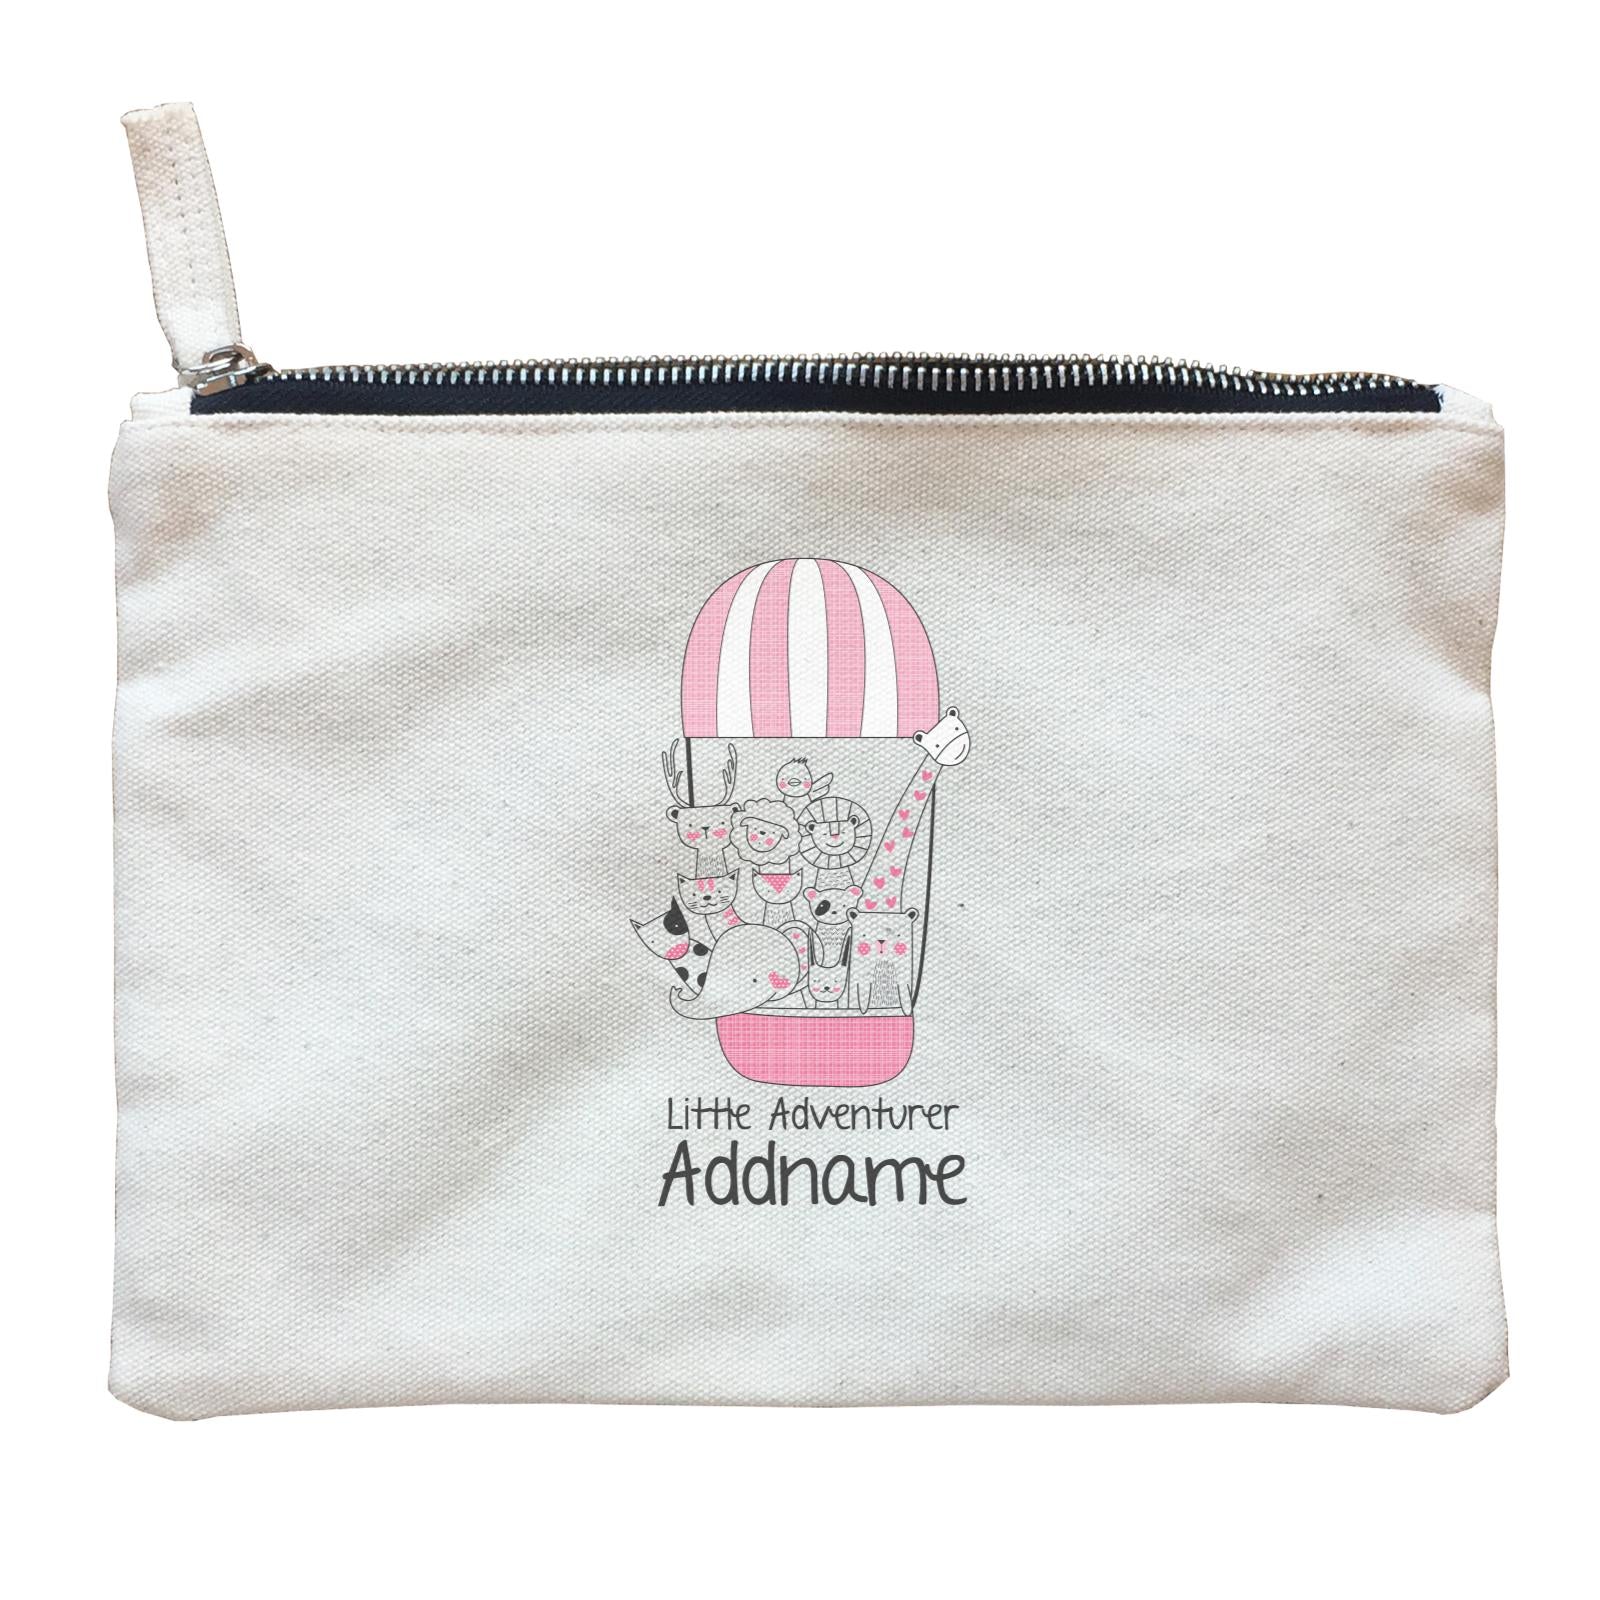 Cute Animals And Friends Series Animal Group Little Adventurer Addname Zipper Pouch